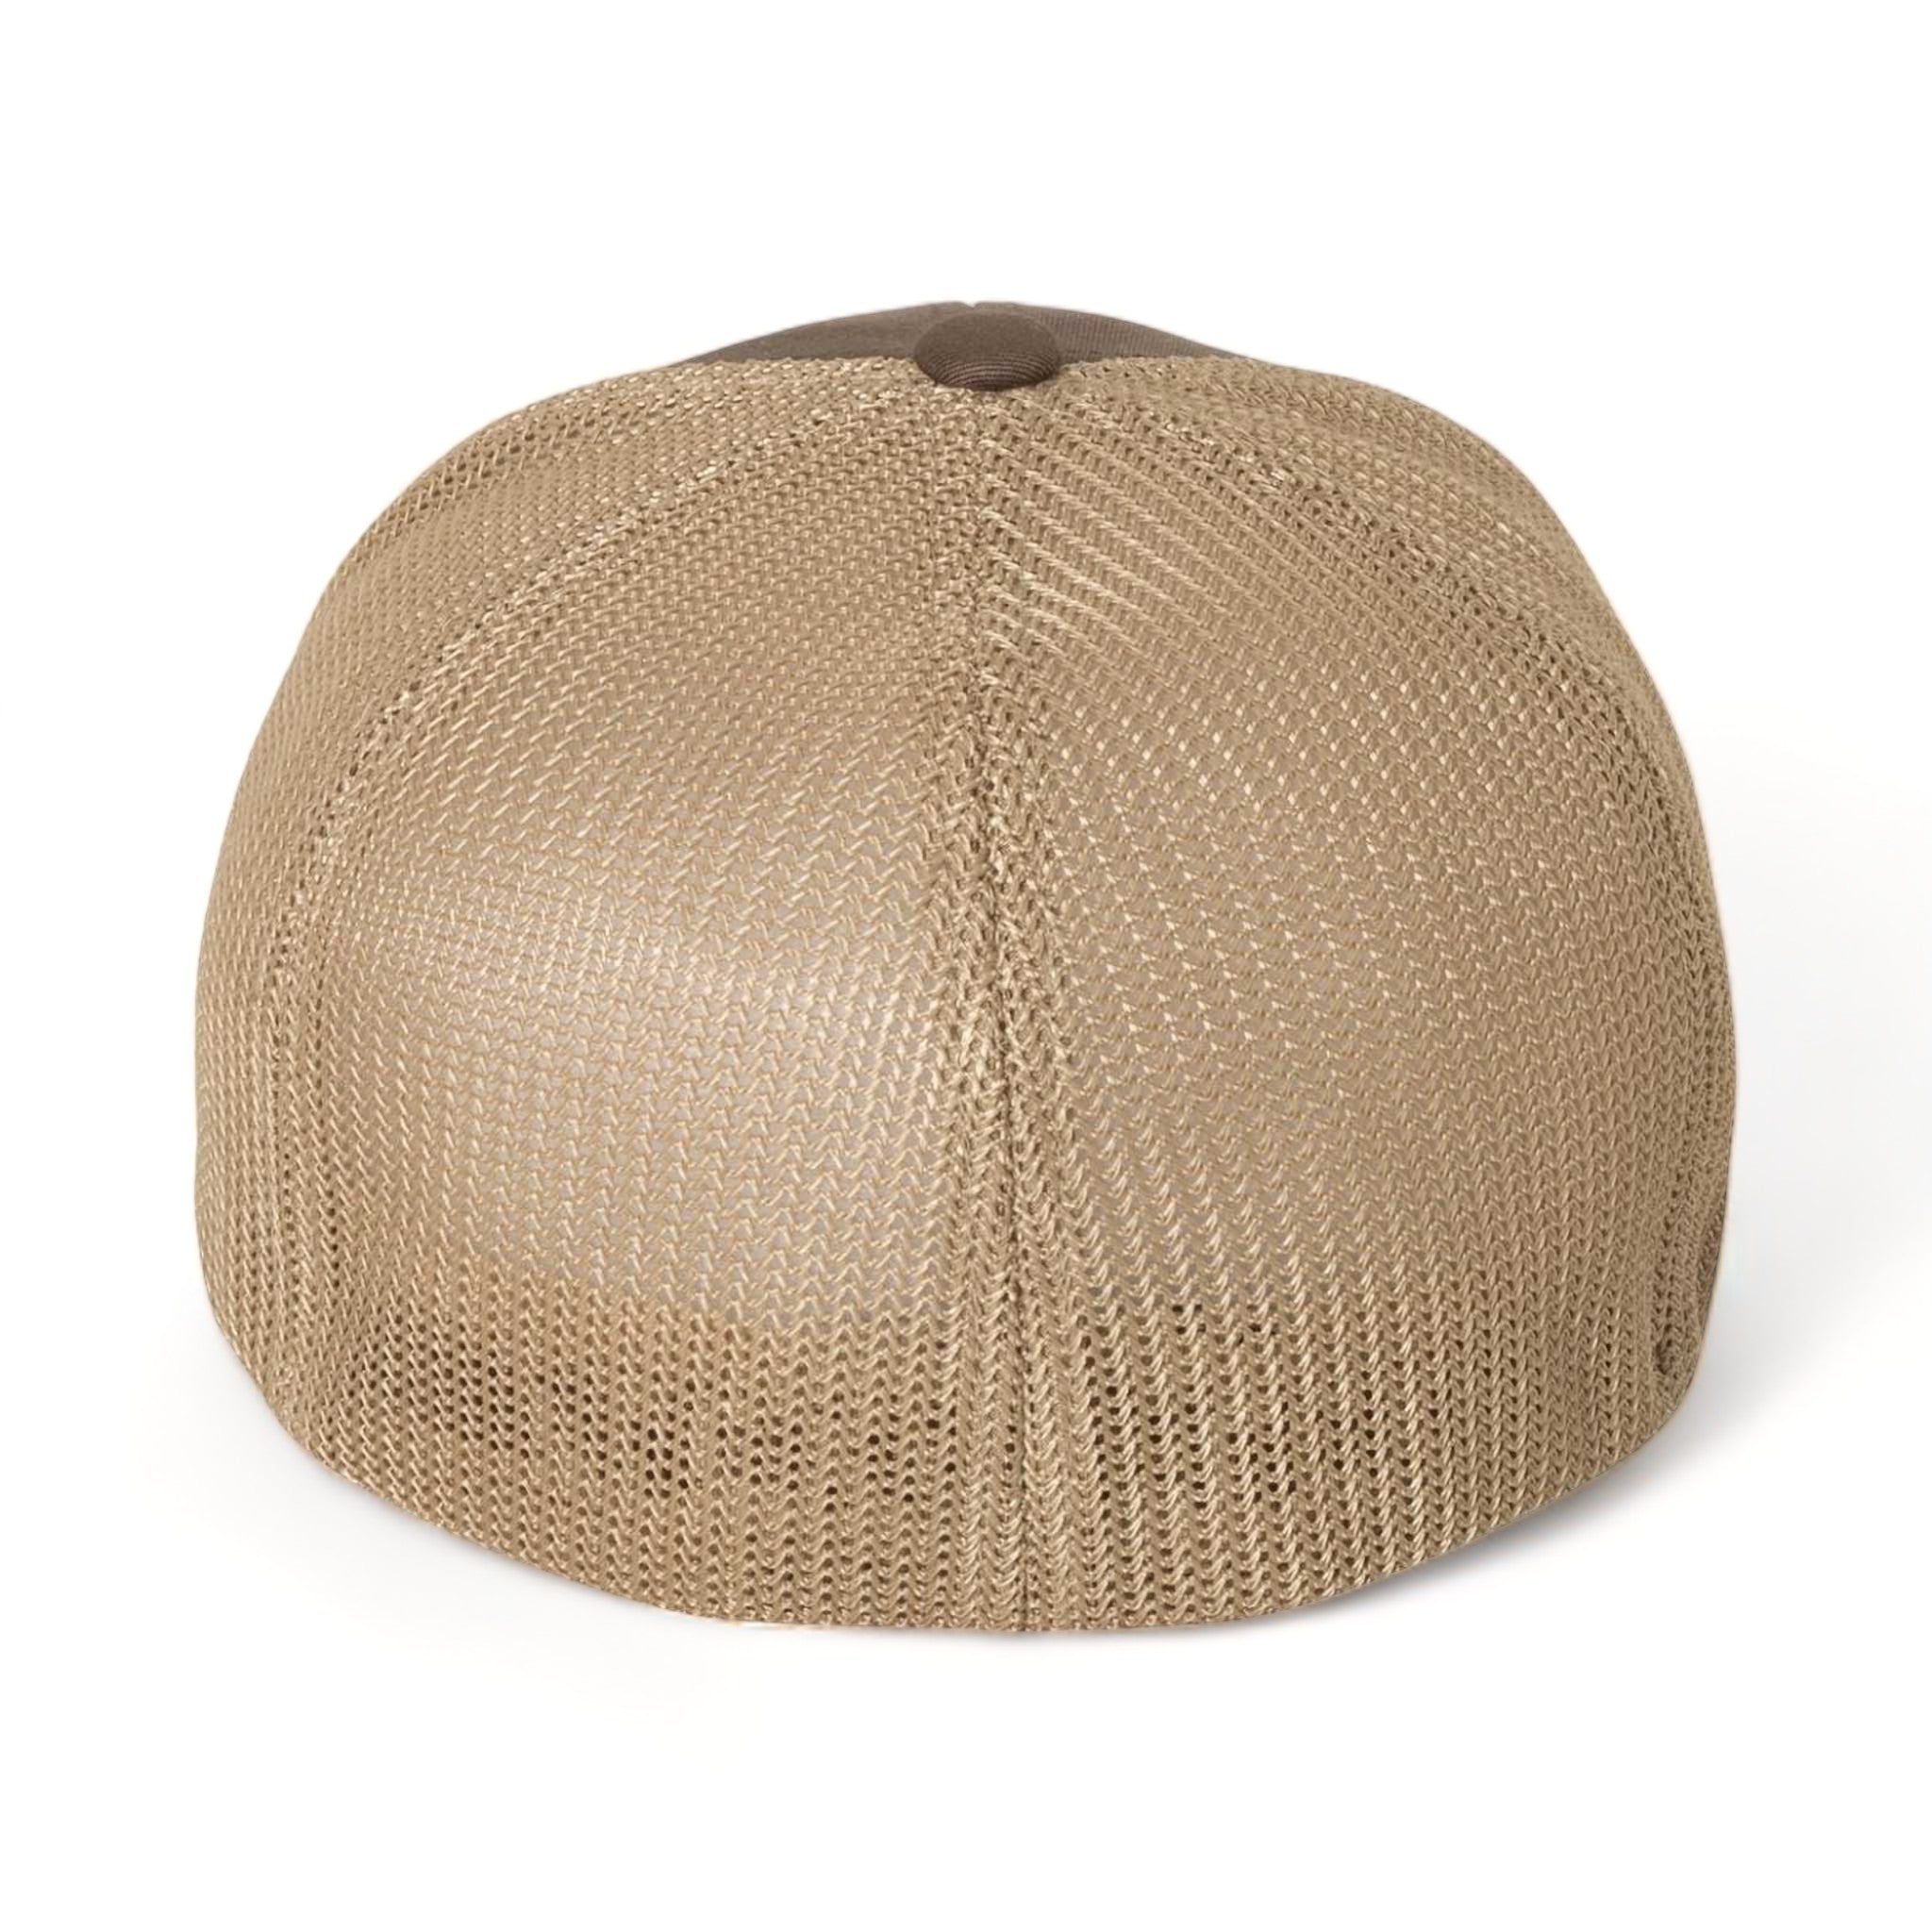 Back view of Flexfit 6511 custom hat in brown and khaki